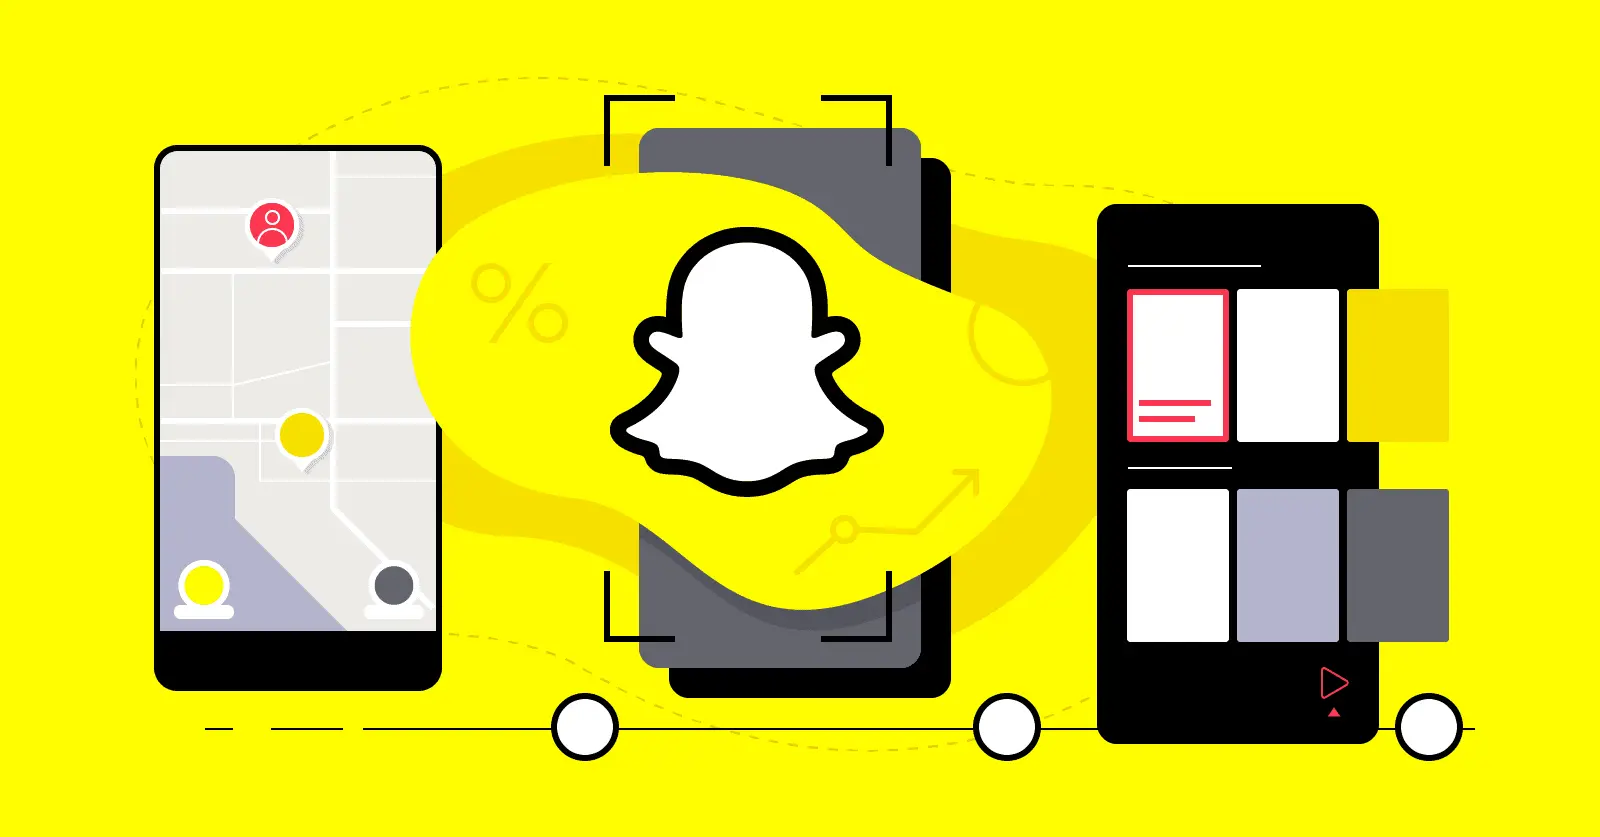 Mastering Your Snaps: 5 Daily Tech Tips from Snapchat